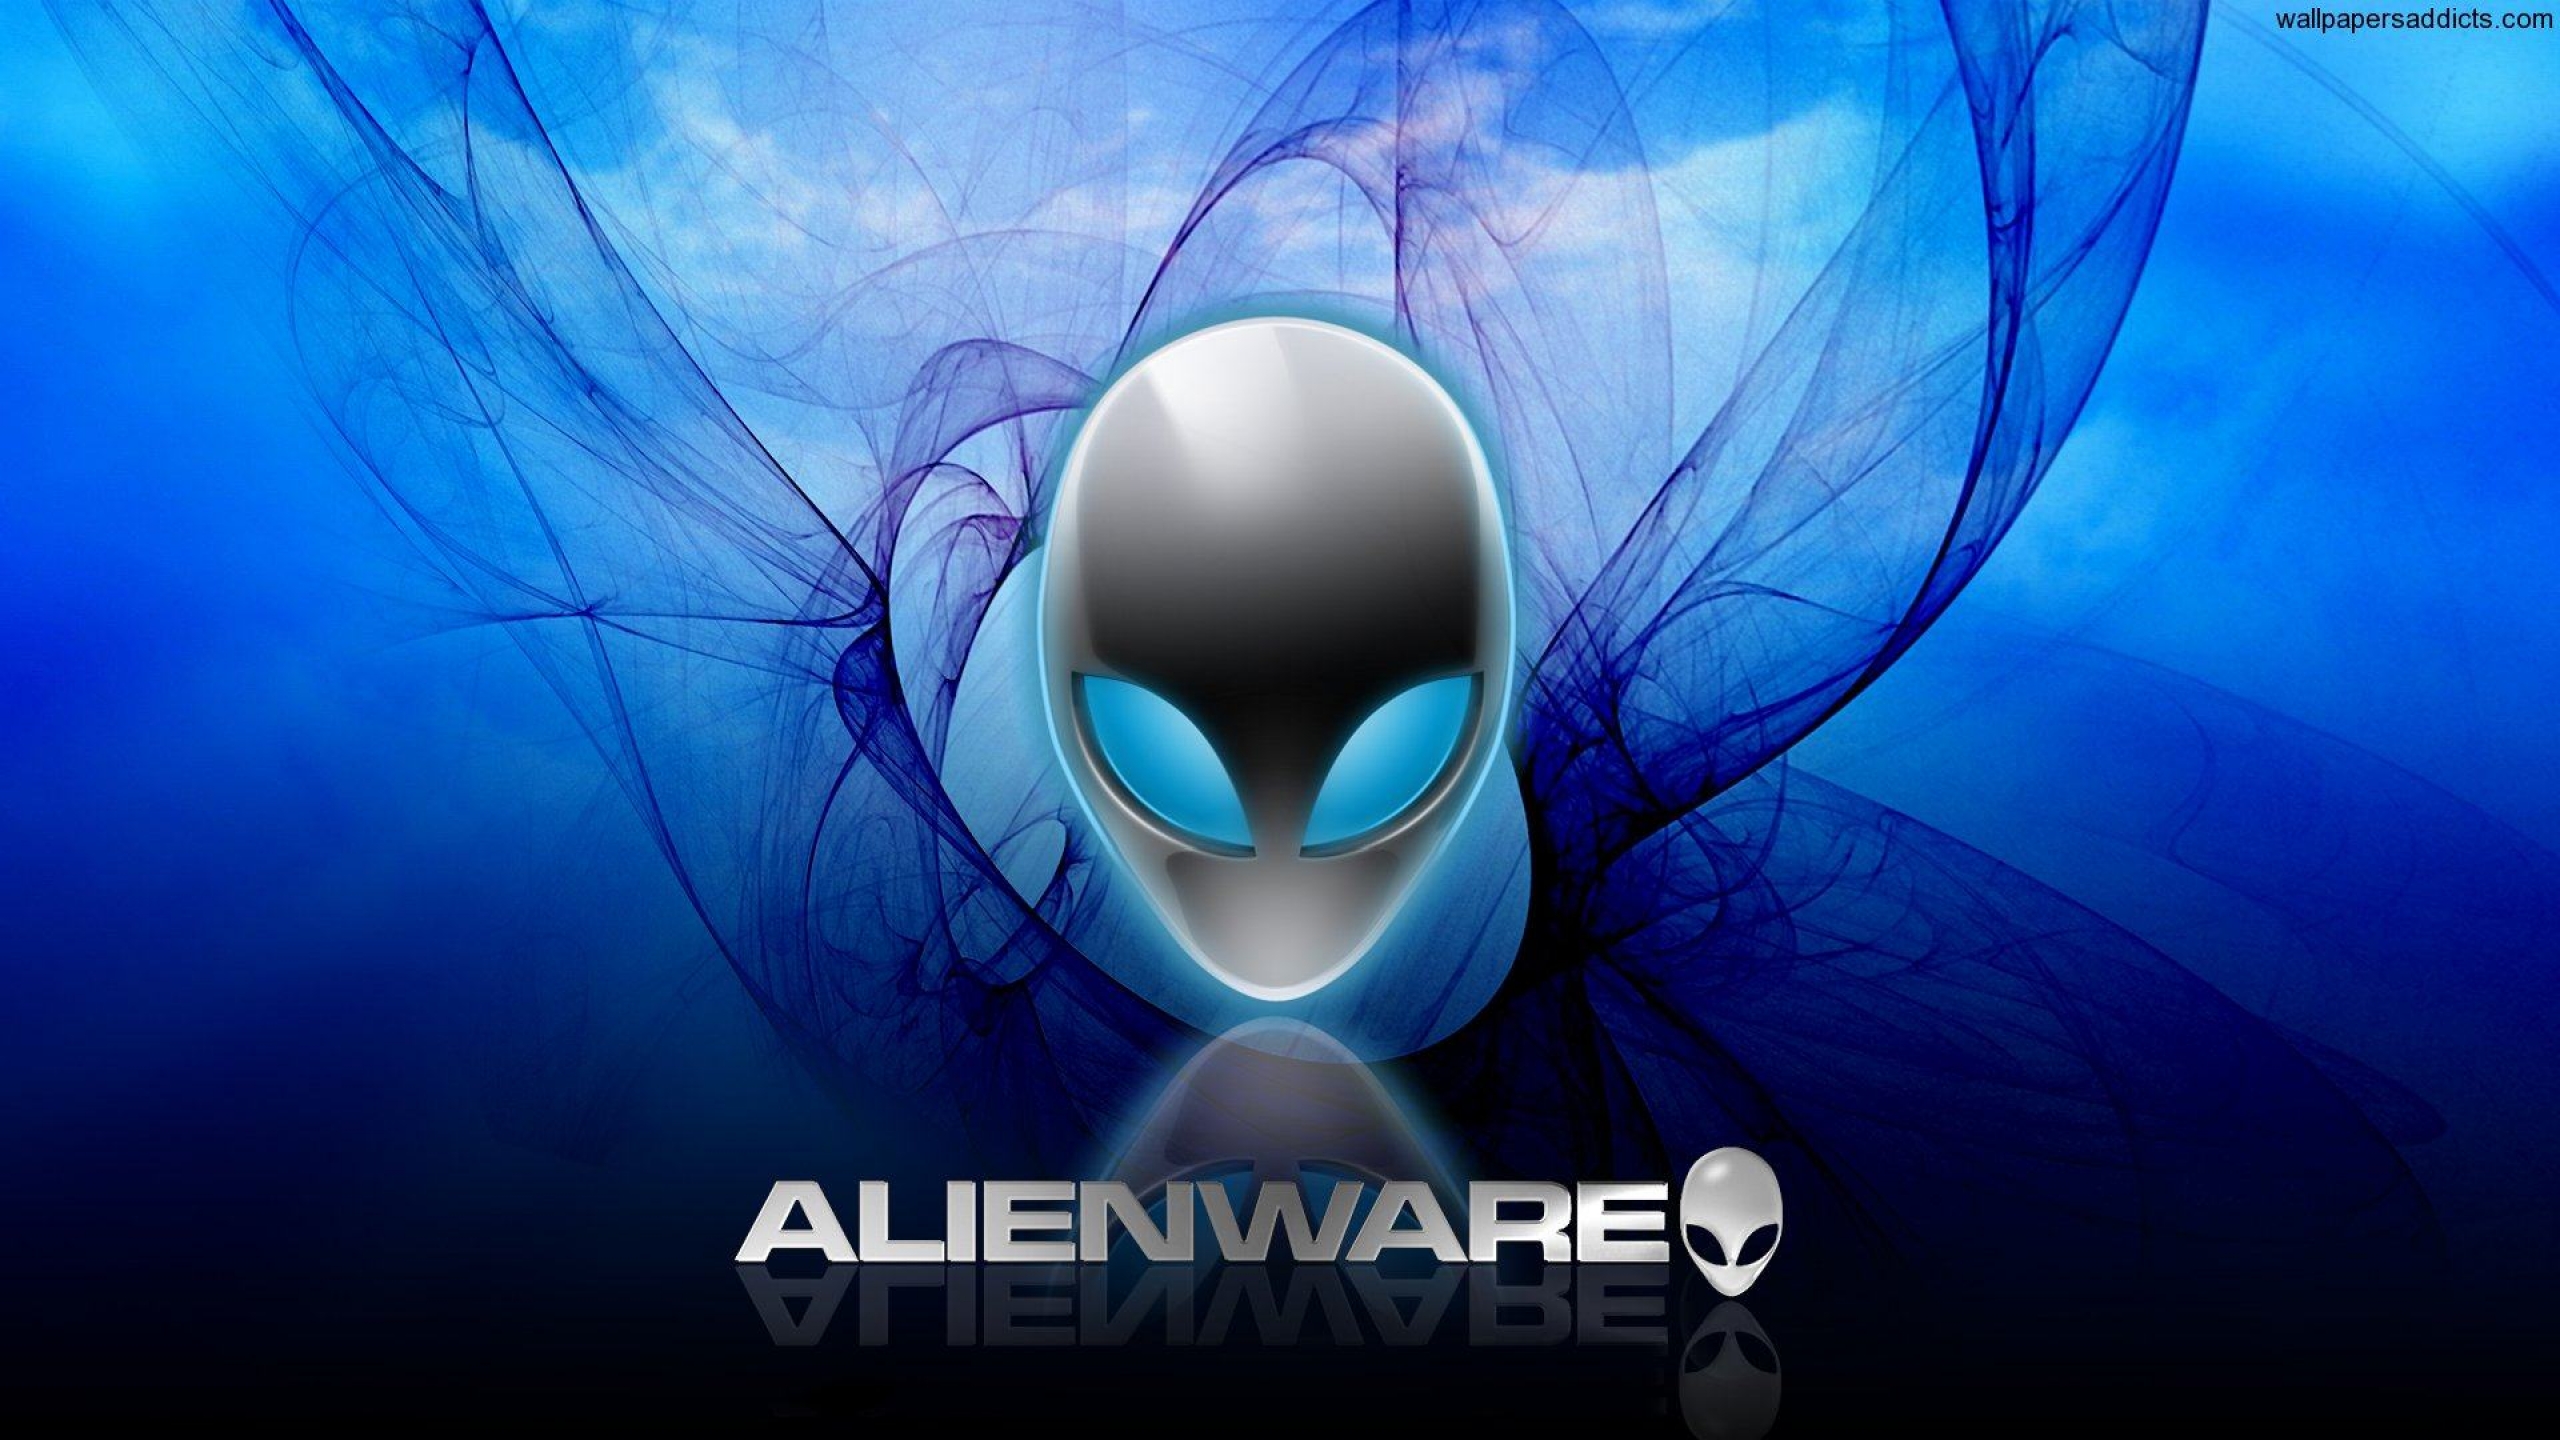 Alienware chrome wallpaper Wallpapers wallpapers backgrounds 2560x1440